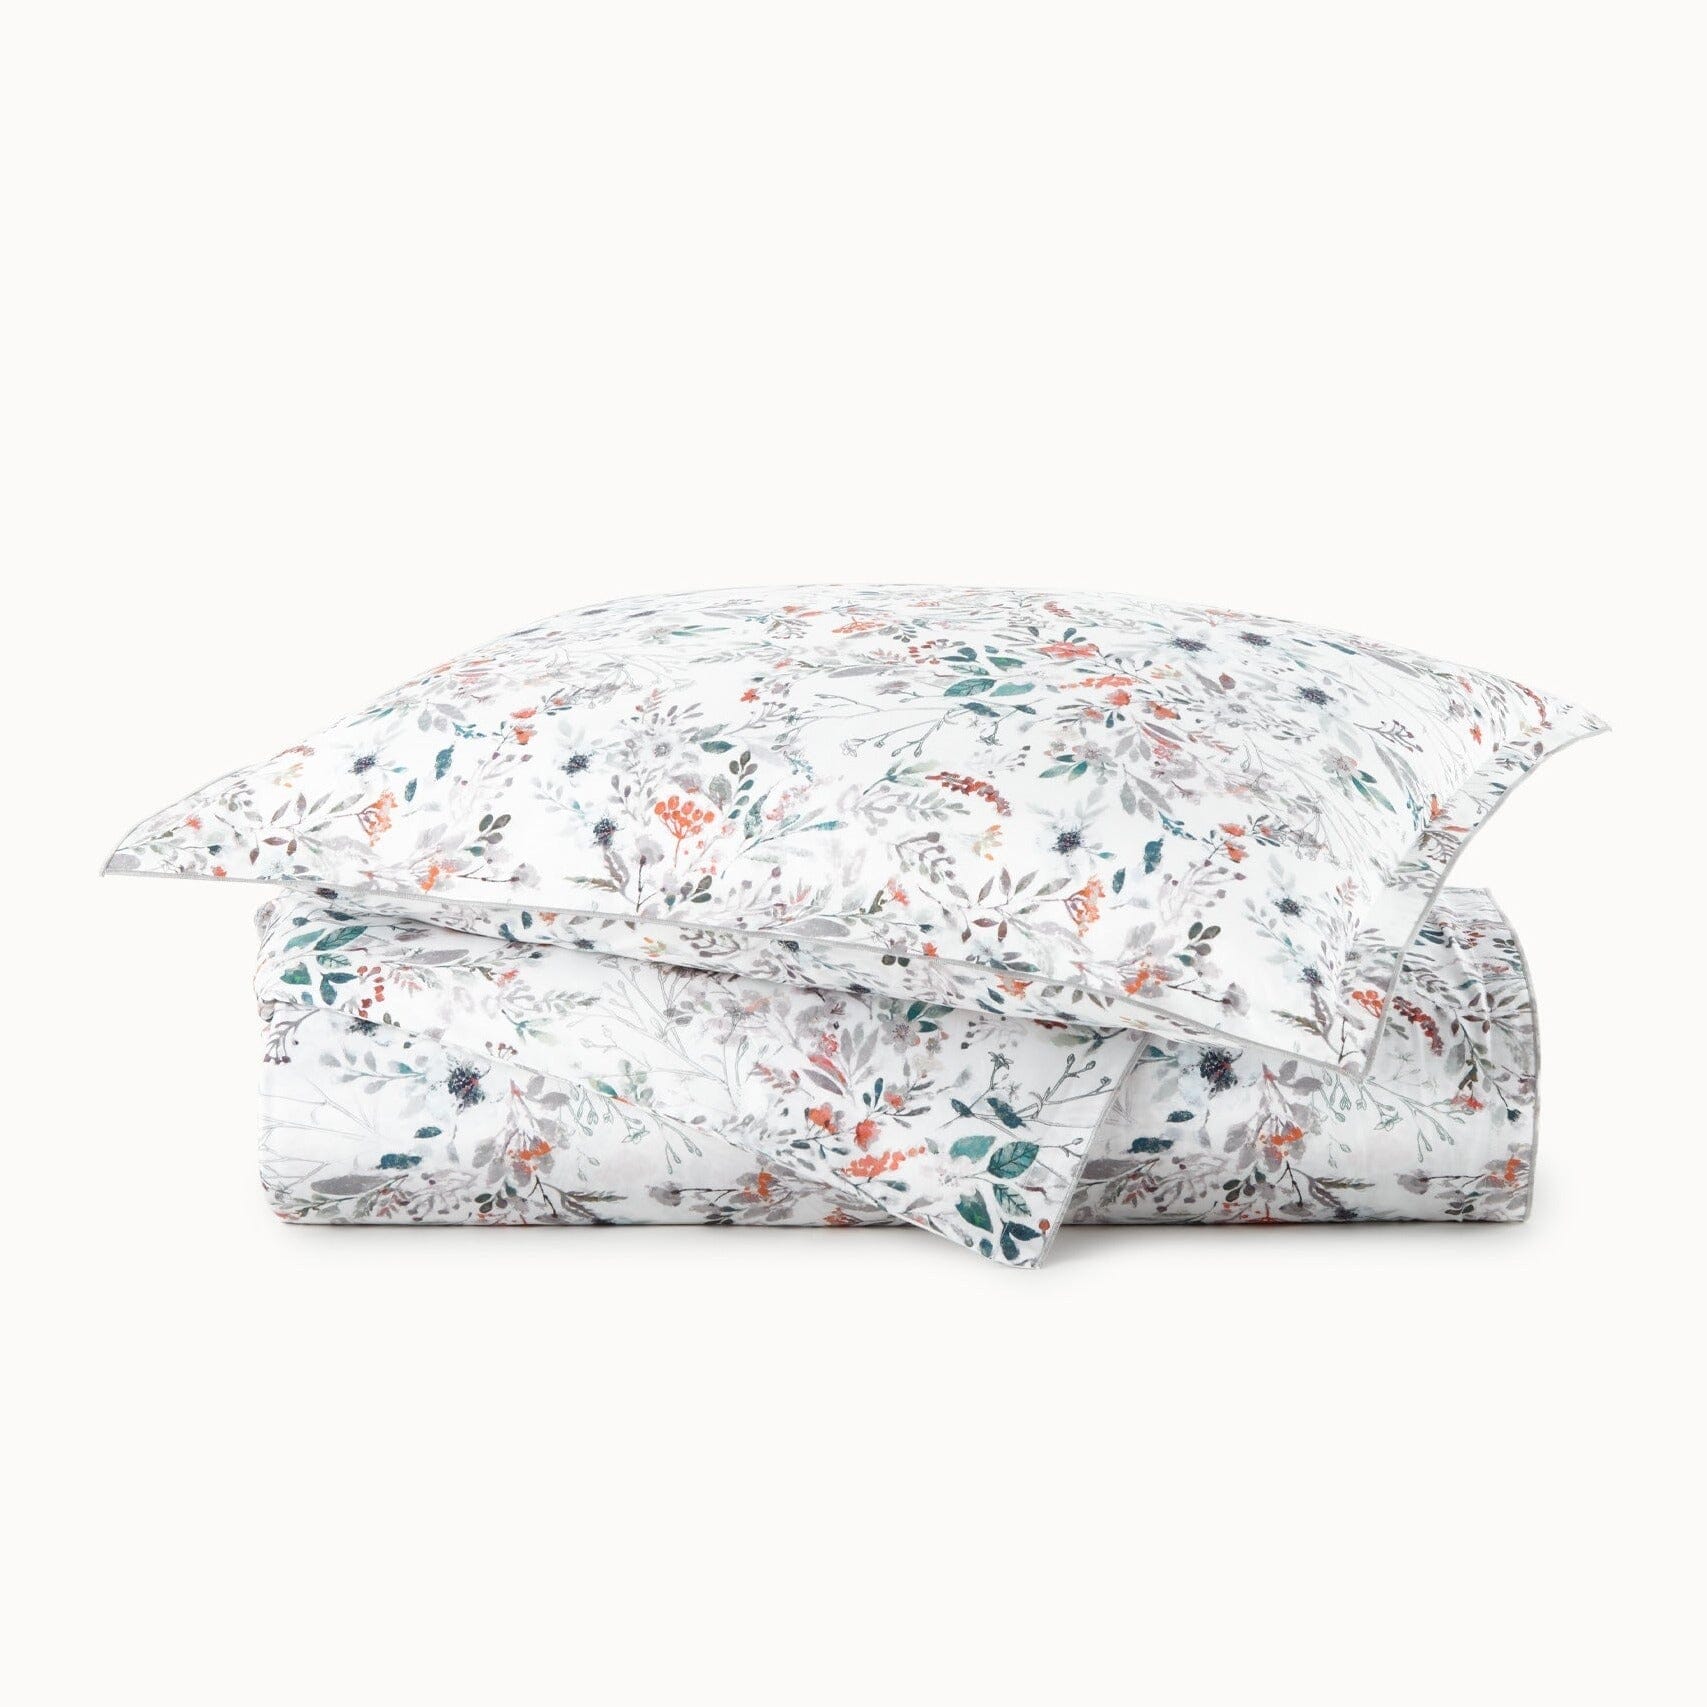 Duvet Cover with Pillow on Top - Peacock Alley Chloe Fog Bedding at Fig Linens and Home